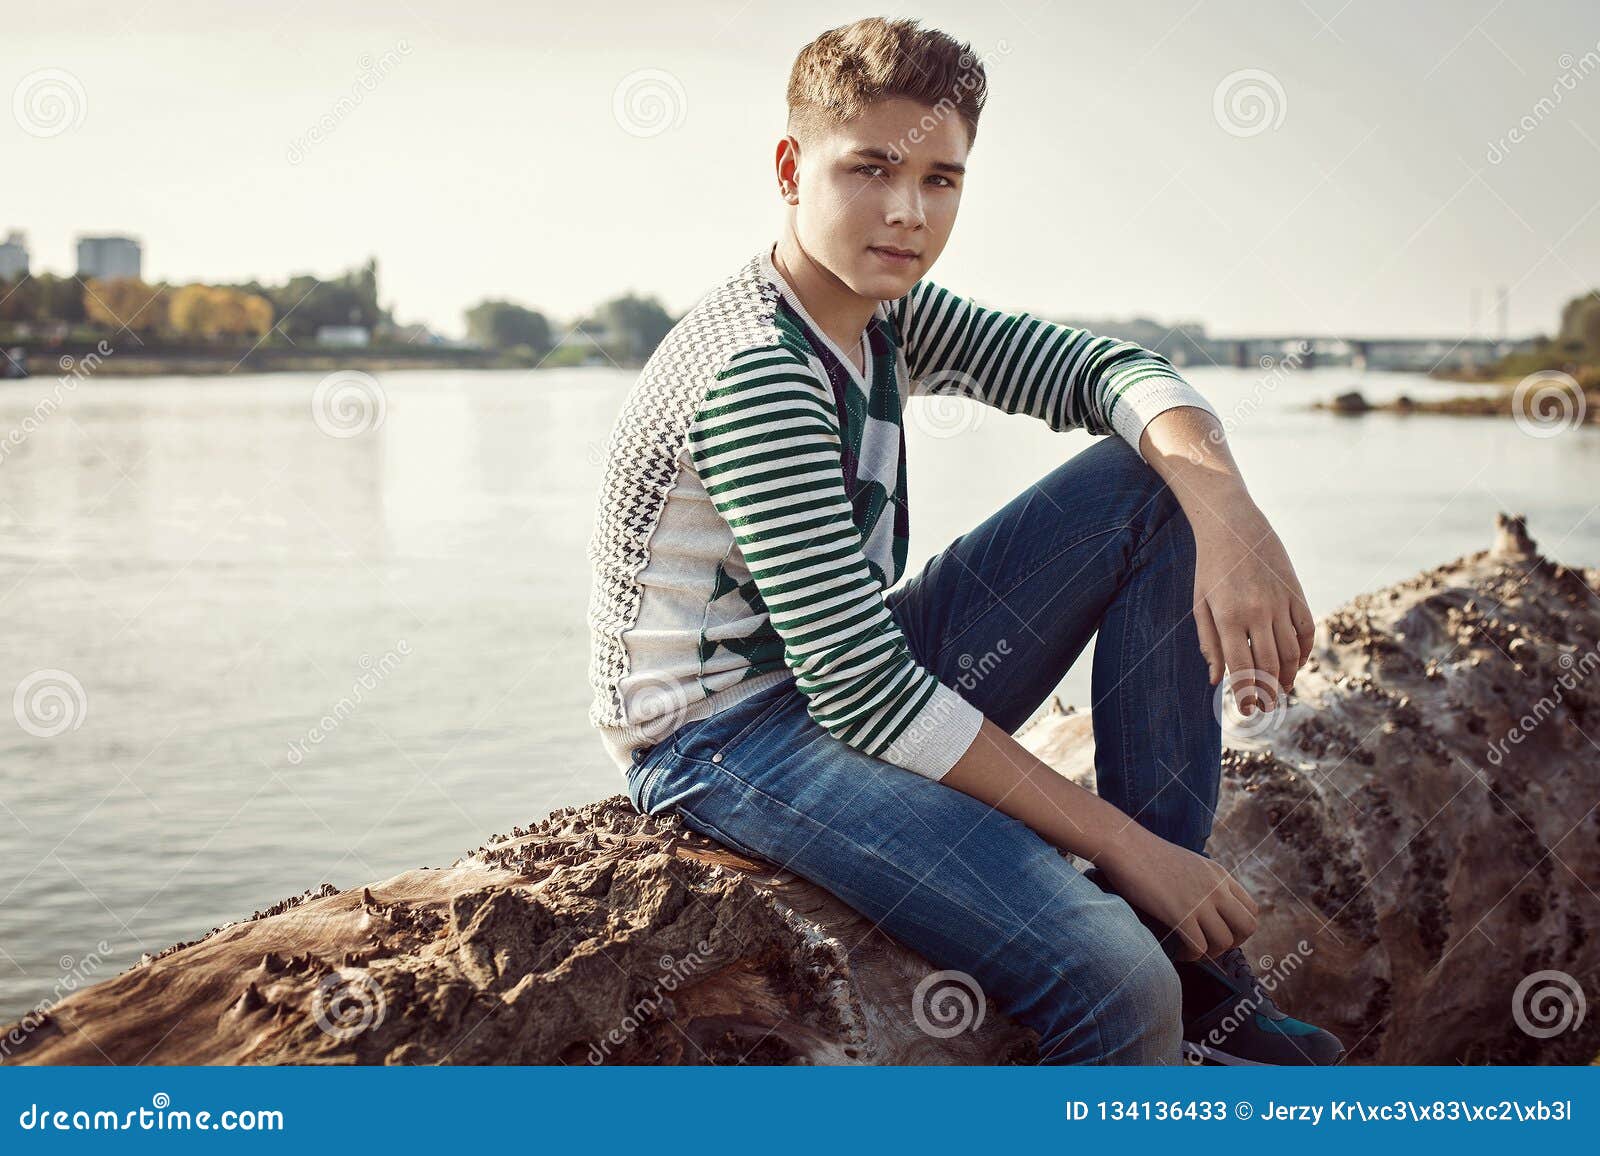 Handsome Young Boy Looking at Camera Stock Image - Image of outdoor ...